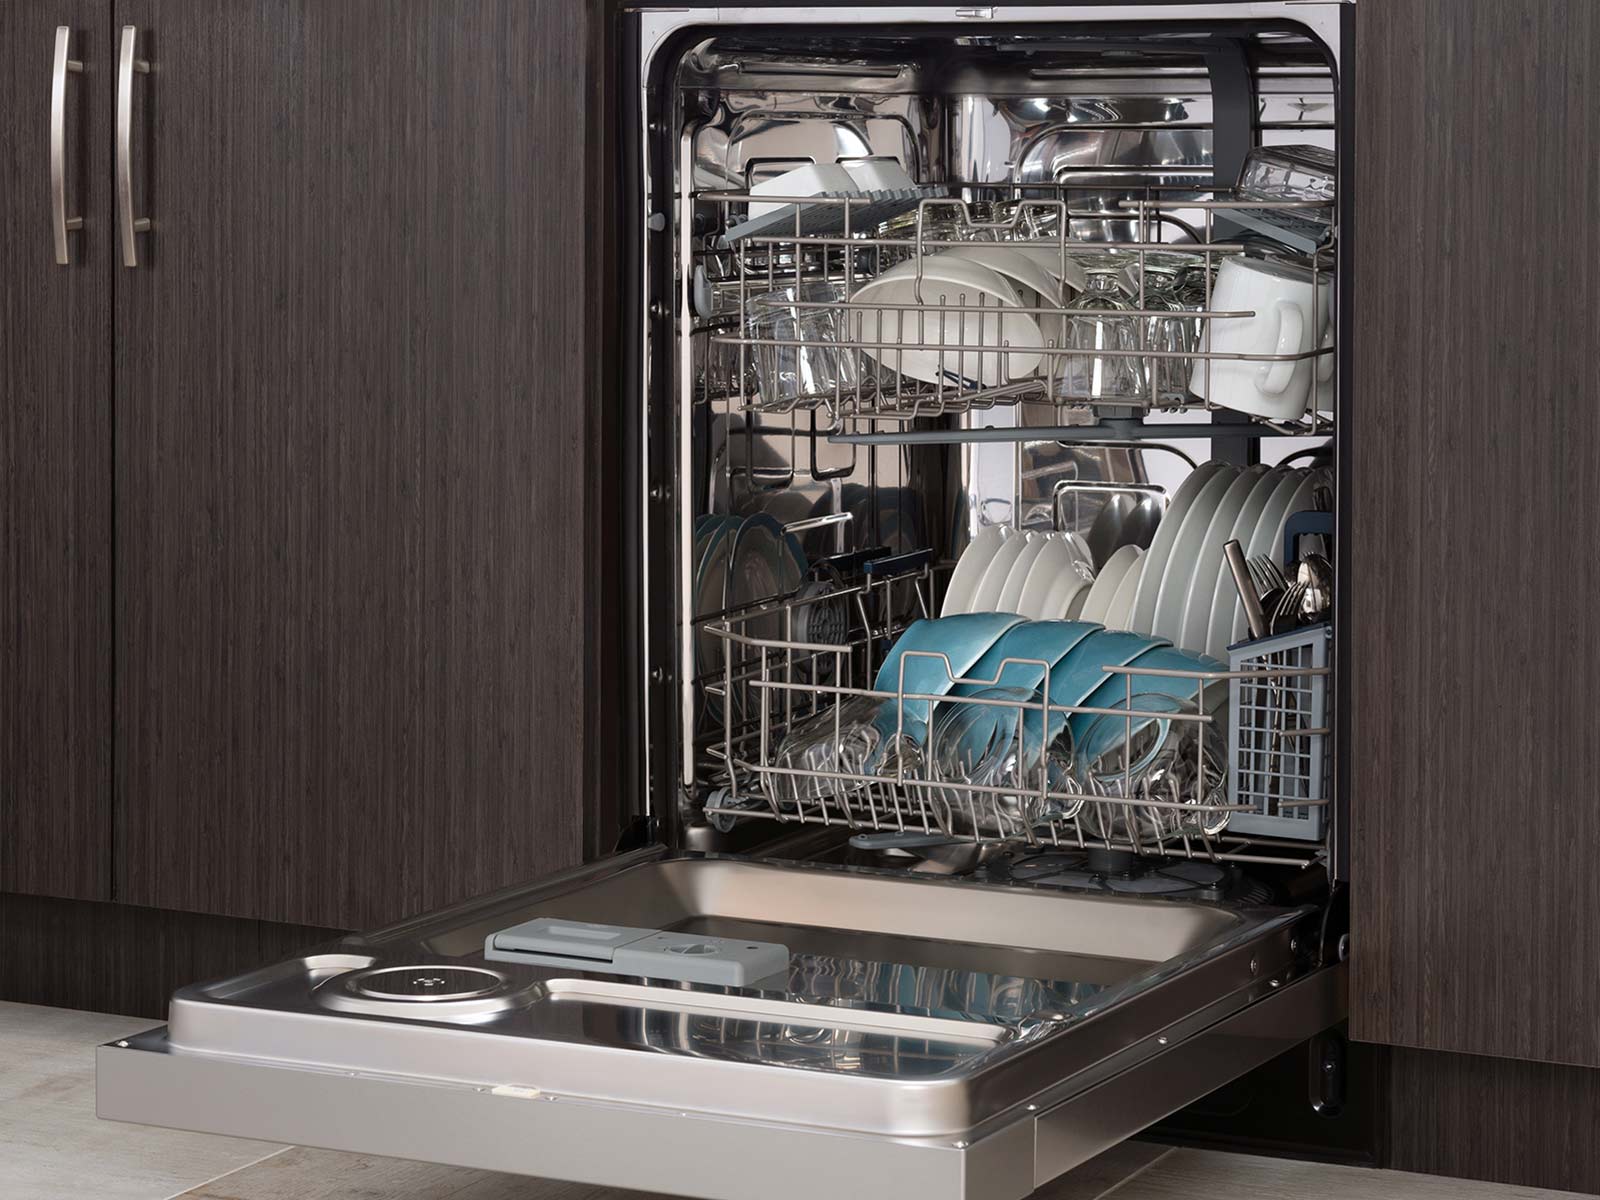 https://image-us.samsung.com/SamsungUS/home/home-appliances/dishwashers/rotary/pdp/dw80j3020us/gallery/09_Dishwasher_DW80J3020US_Lifestyle_Kitchen_Open_Dishes_Undercounter_SIlver.jpg?$product-details-jpg$